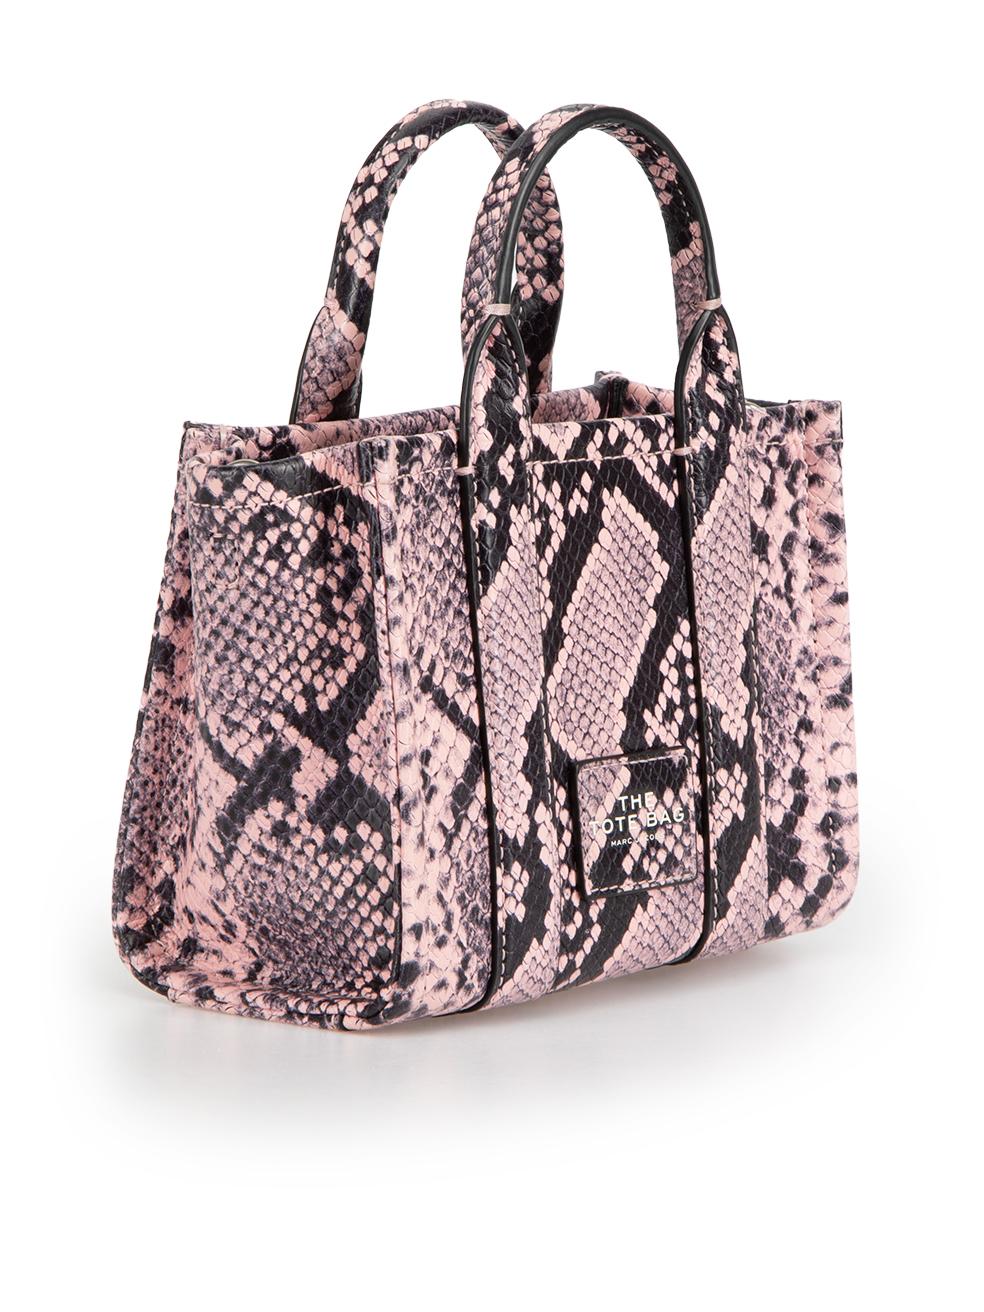 CONDITION is Very good. Hardly any visible wear to the bag is evident on this used Marc Jacobs designer resale item.
 
 
 
 Details
 
 
 The Tote Bag
 
 Pink
 
 Leather
 
 Mini crossbody bag
 
 Snakeskin embossed pattern
 
 2x Rolled top handles
 
